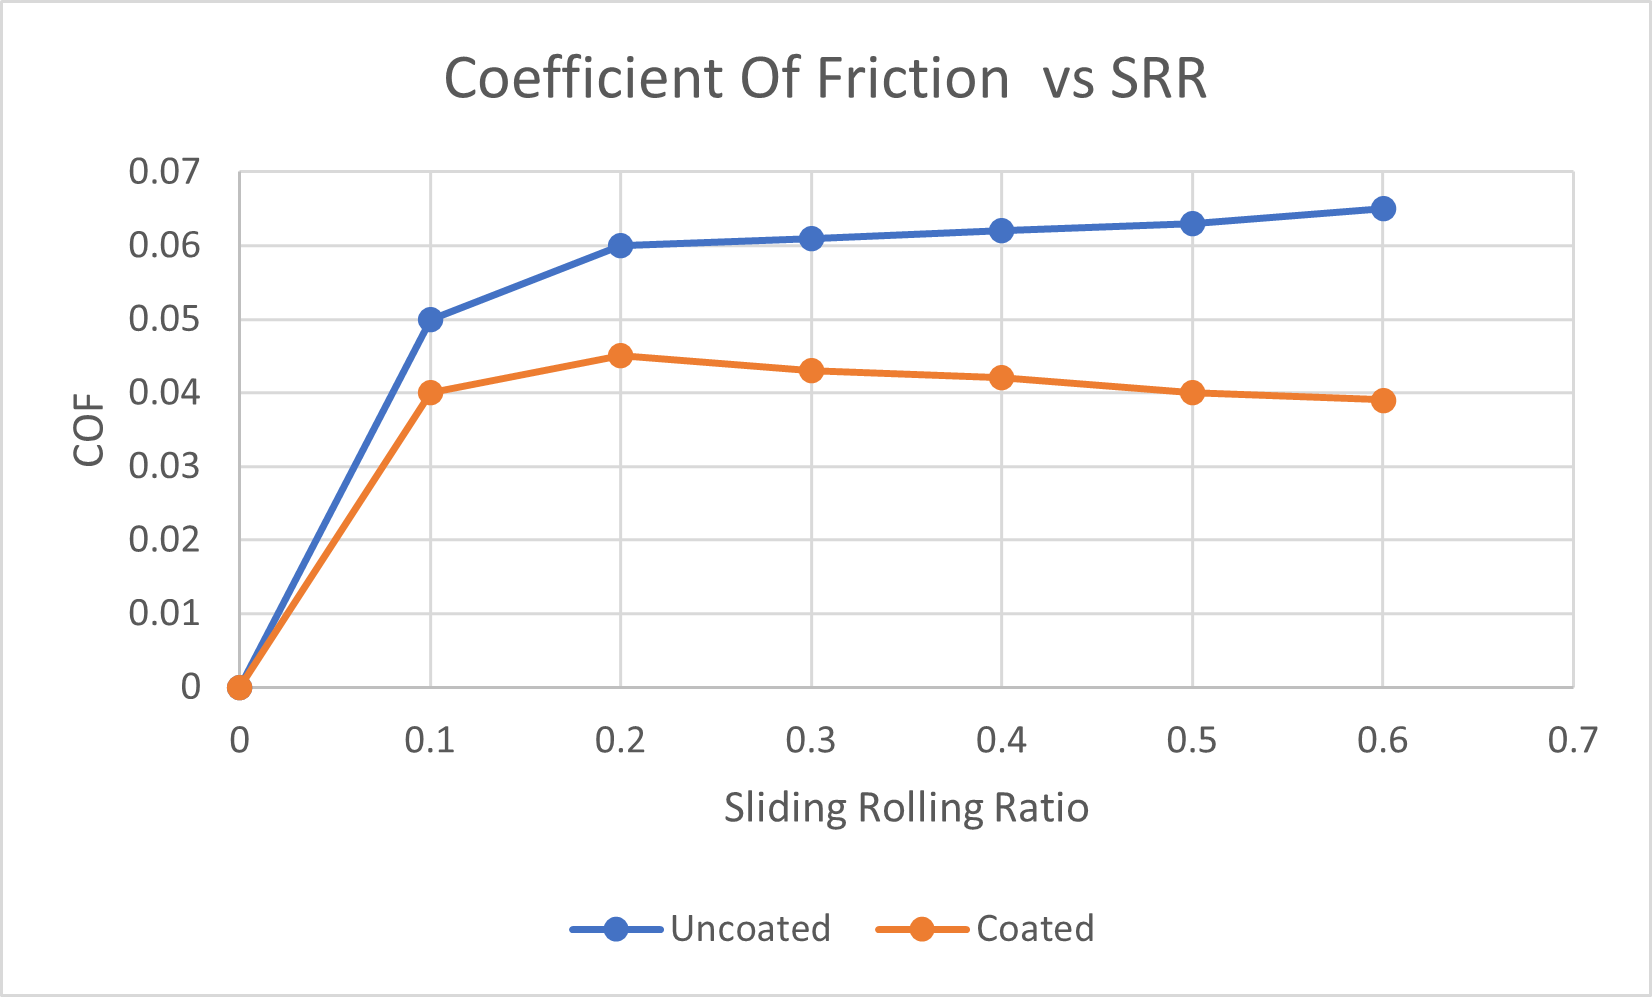 micropitting rig data of coefficient of friction vs. SRR